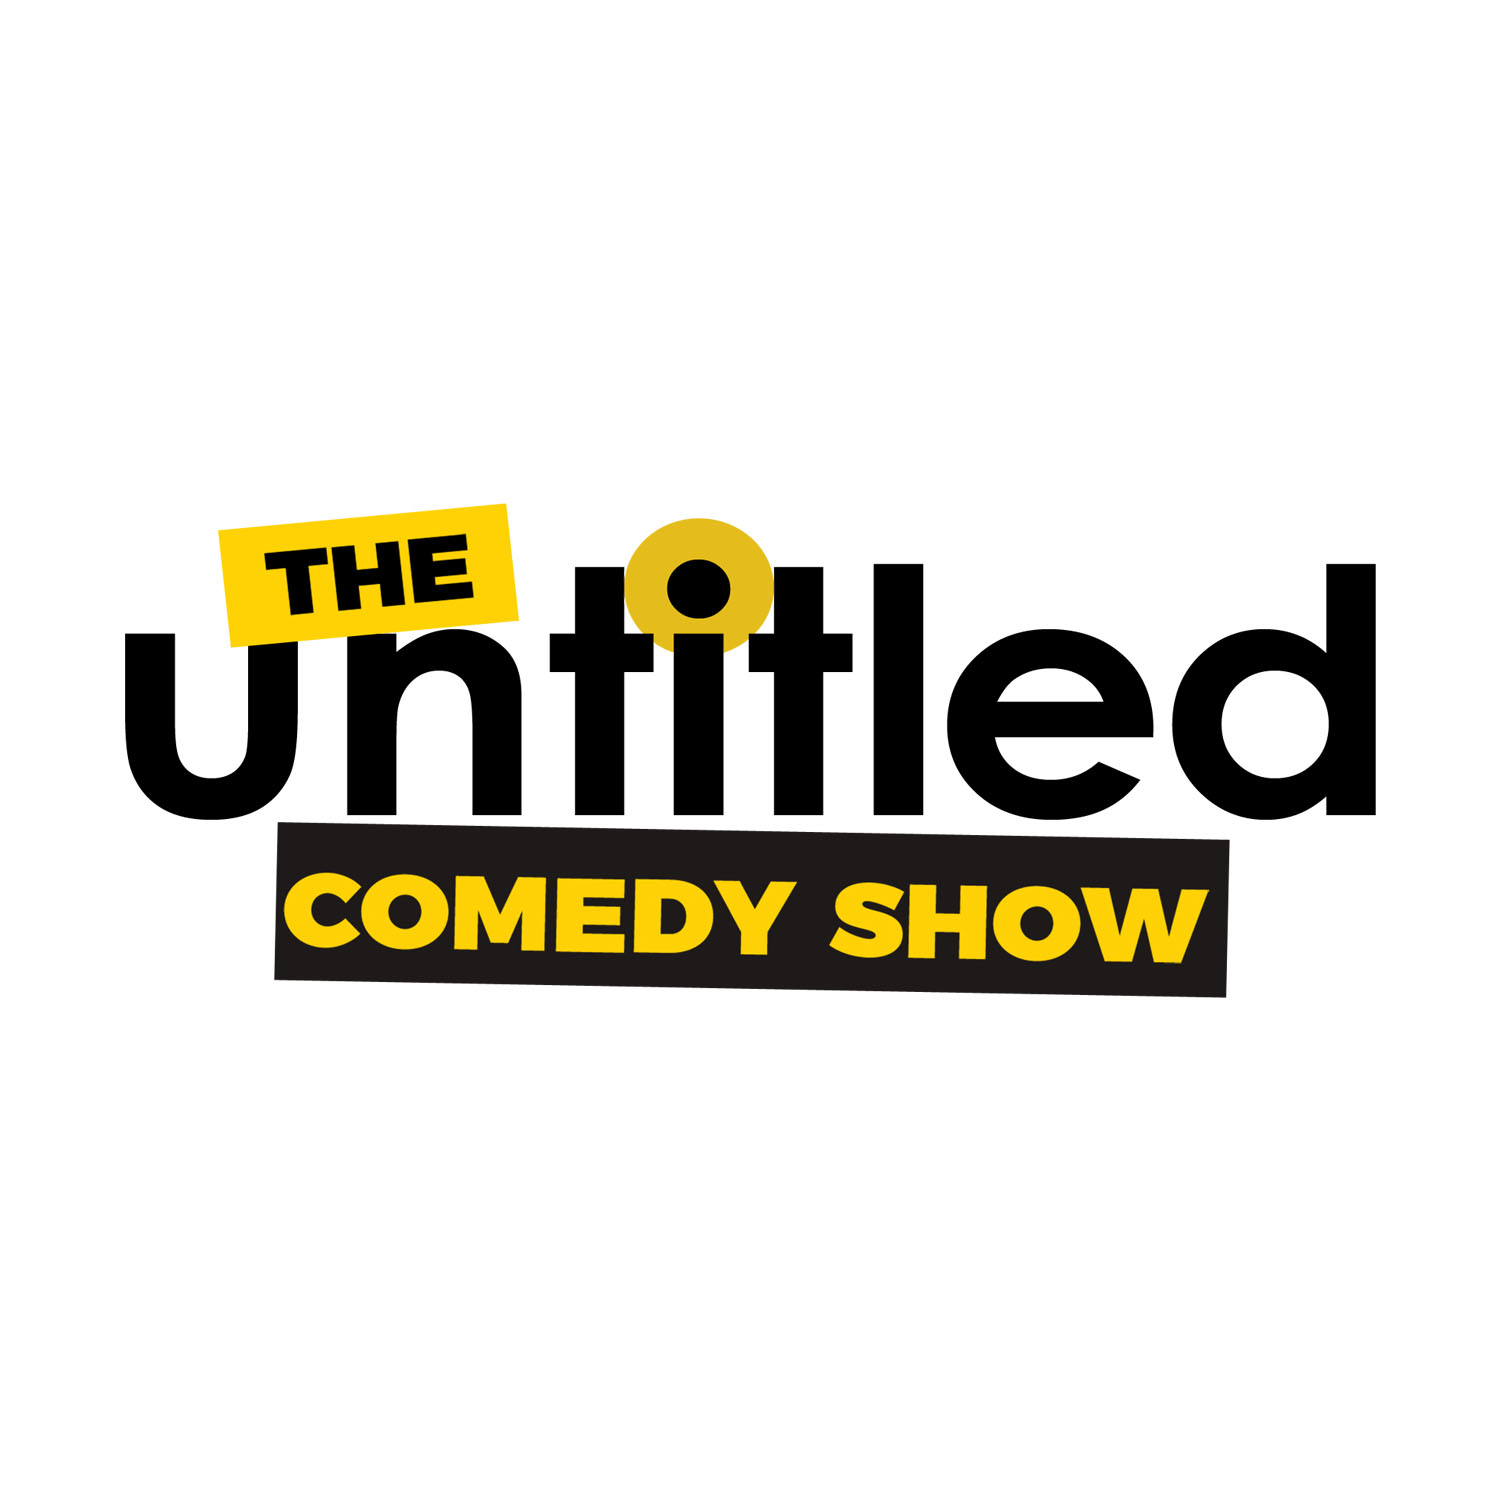 The Untitled Comedy Show Gator Tails